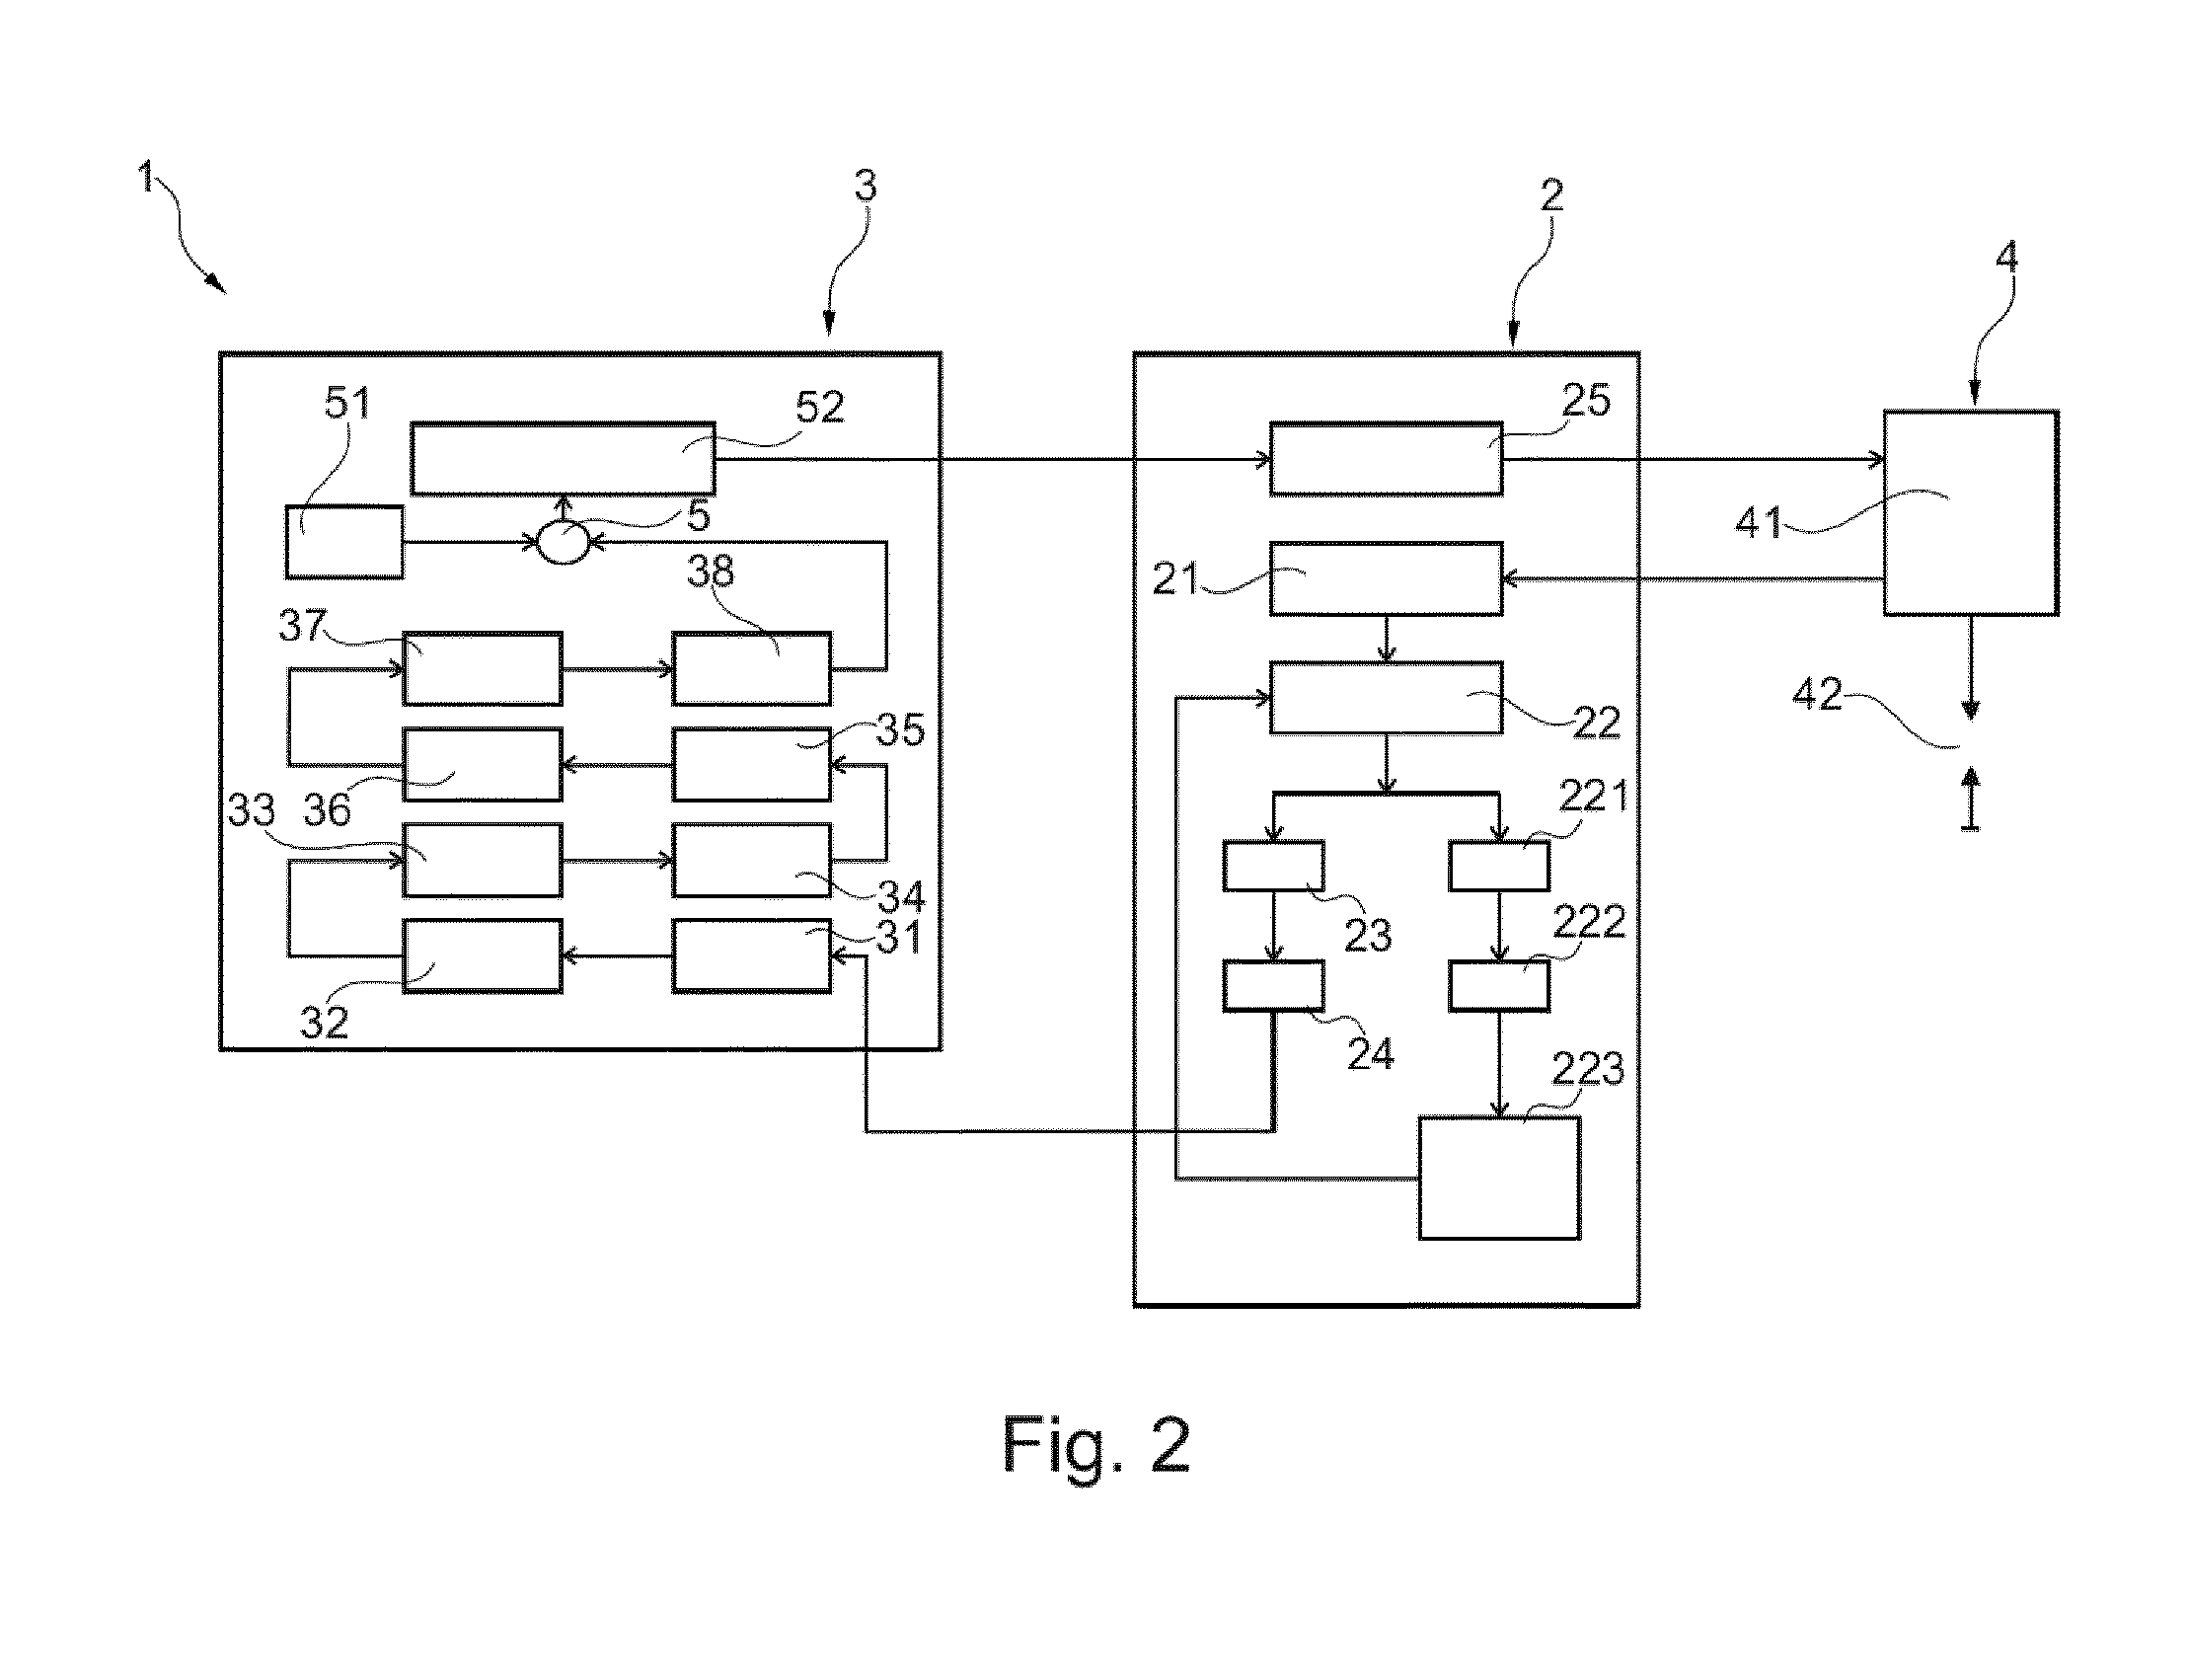 System and Method for Controlling the Performance of an Engine